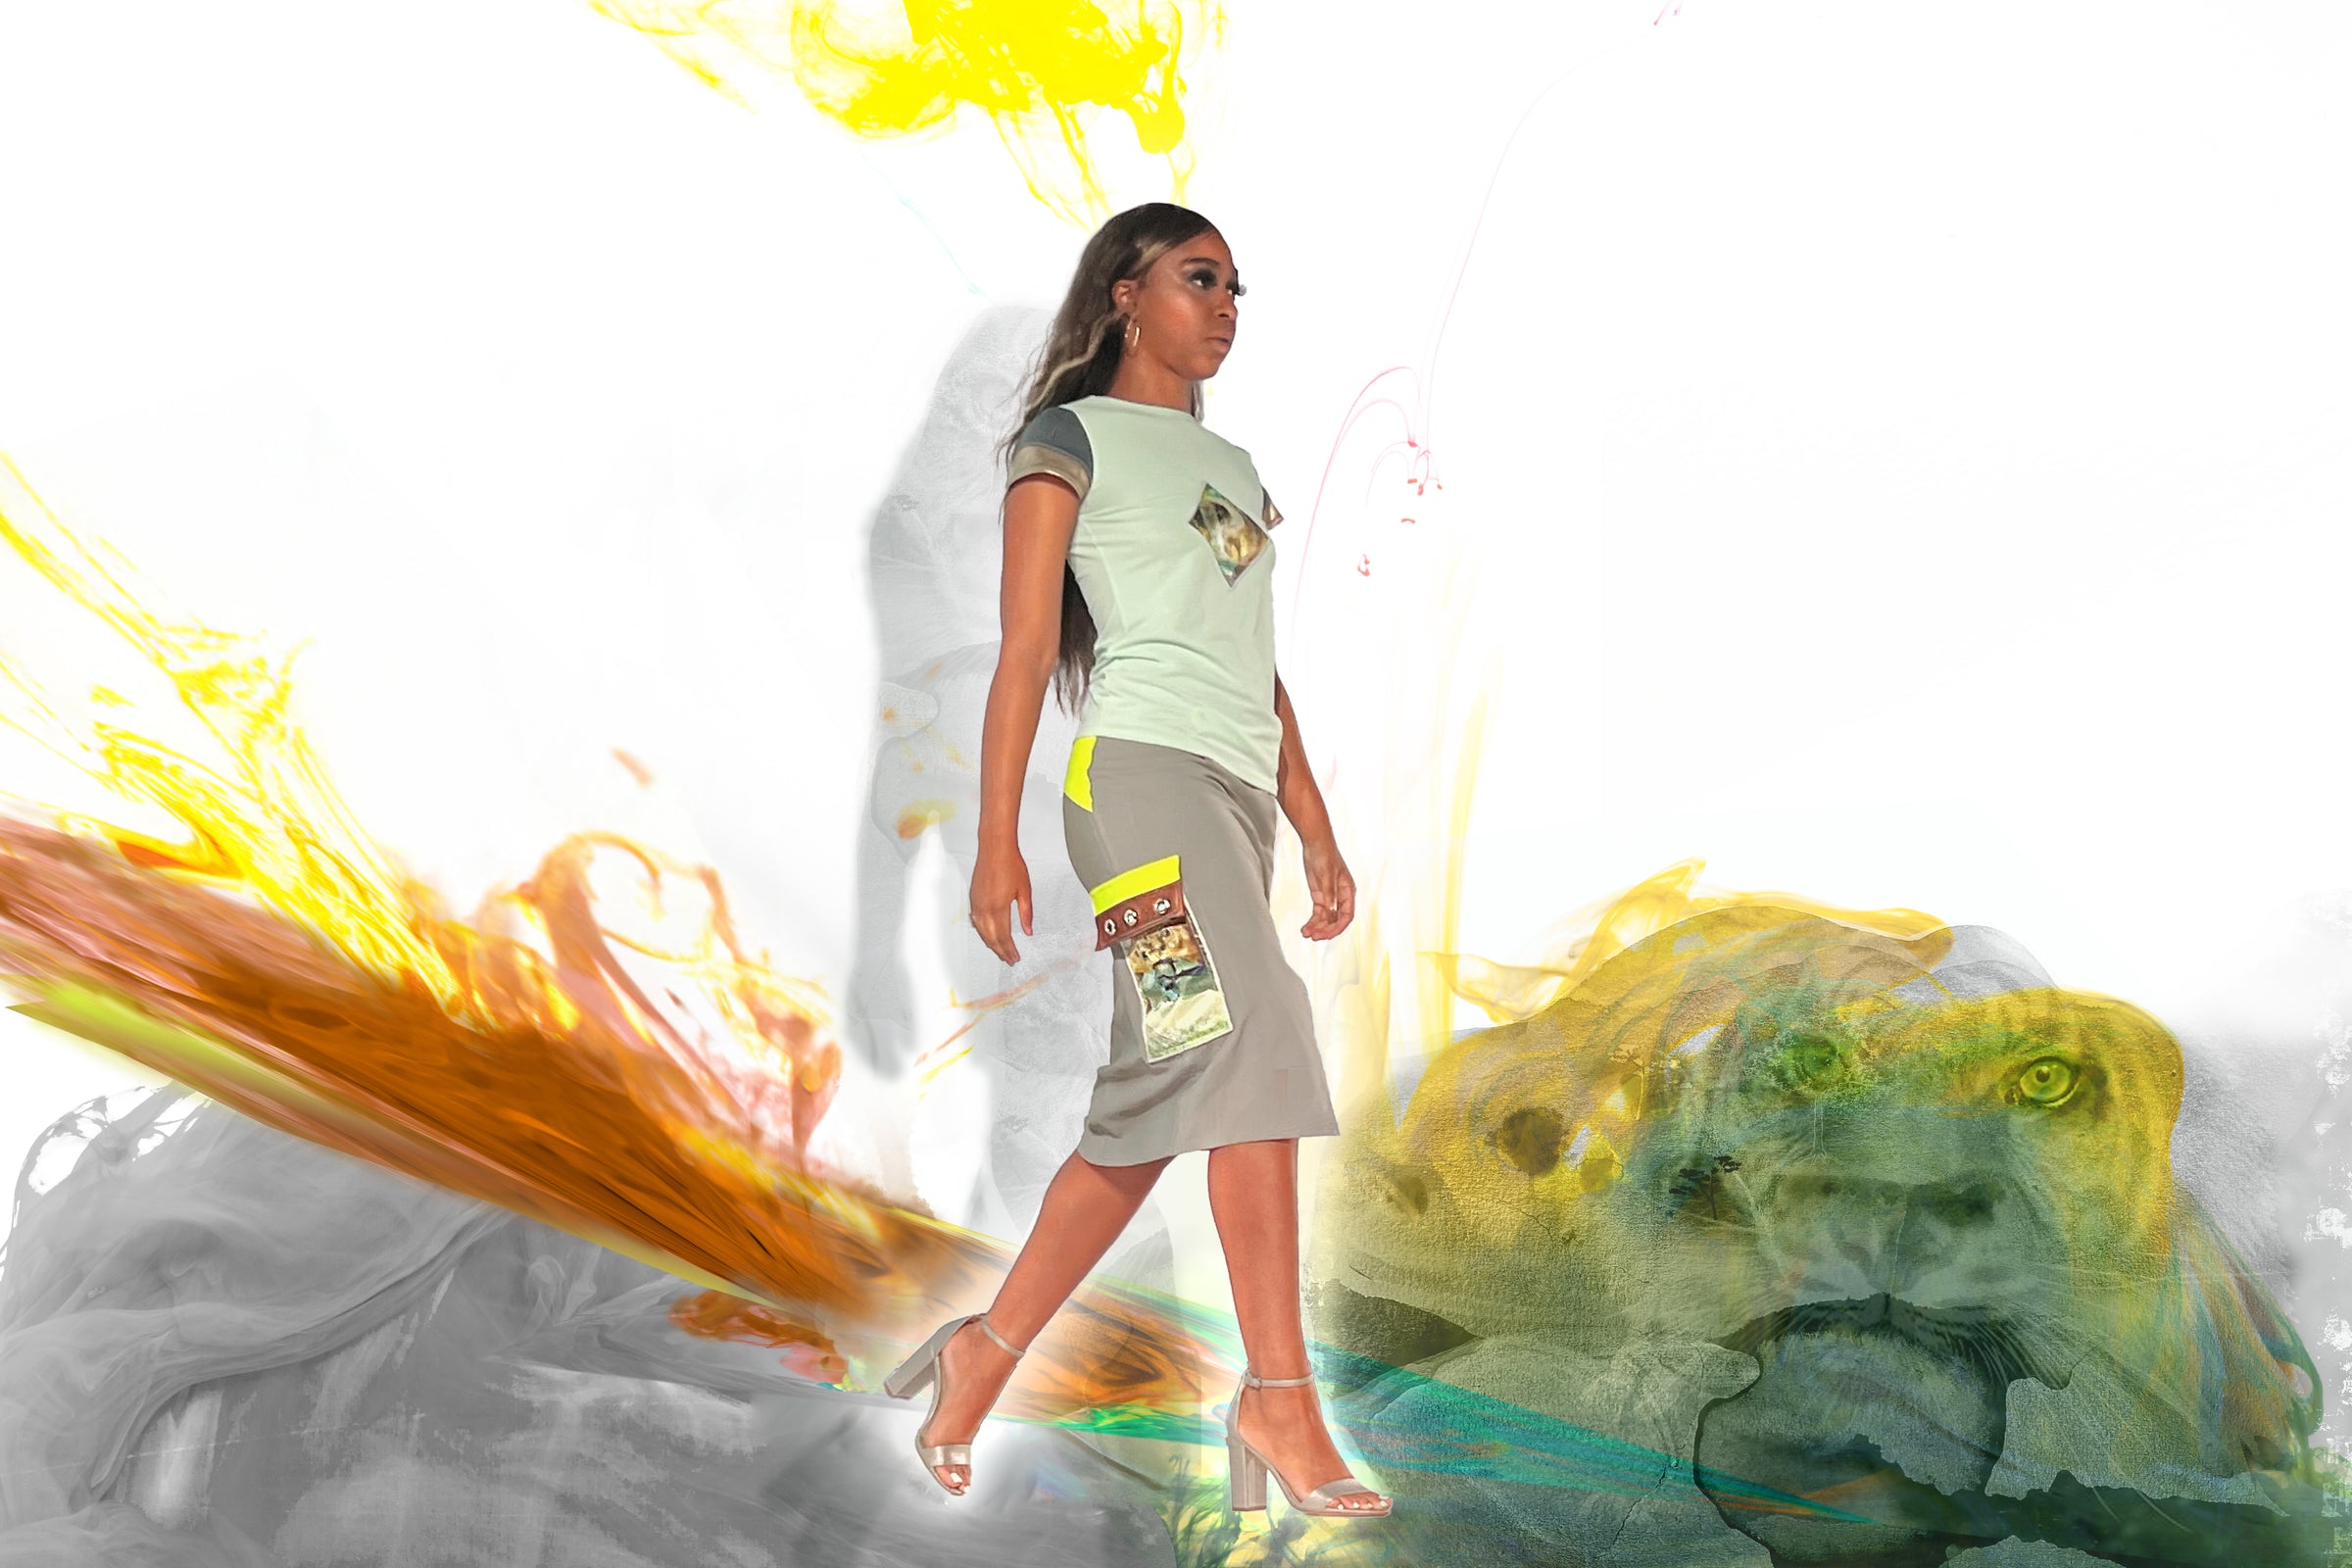 A model wearing Beatta J Collection shirt and a top, walking through the colorful flames with serval's face appearing in the flames. Artistic design.